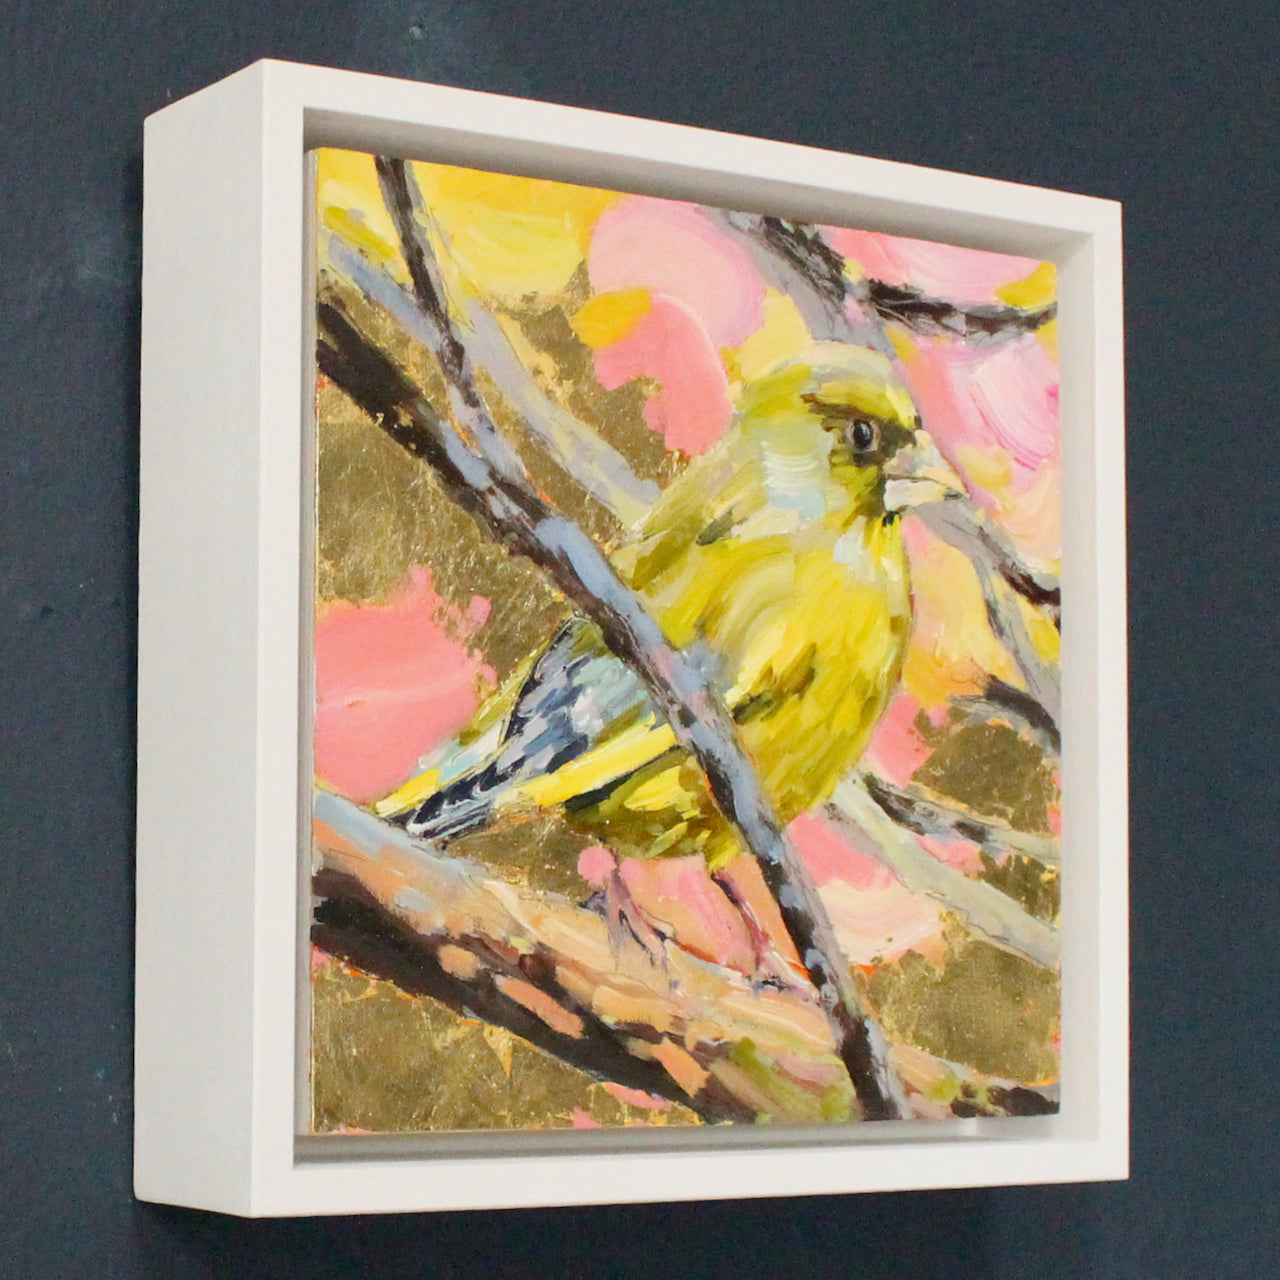 a Jill Hudson painting of a greenfinch on a branch with a pink, yellow and gold background.